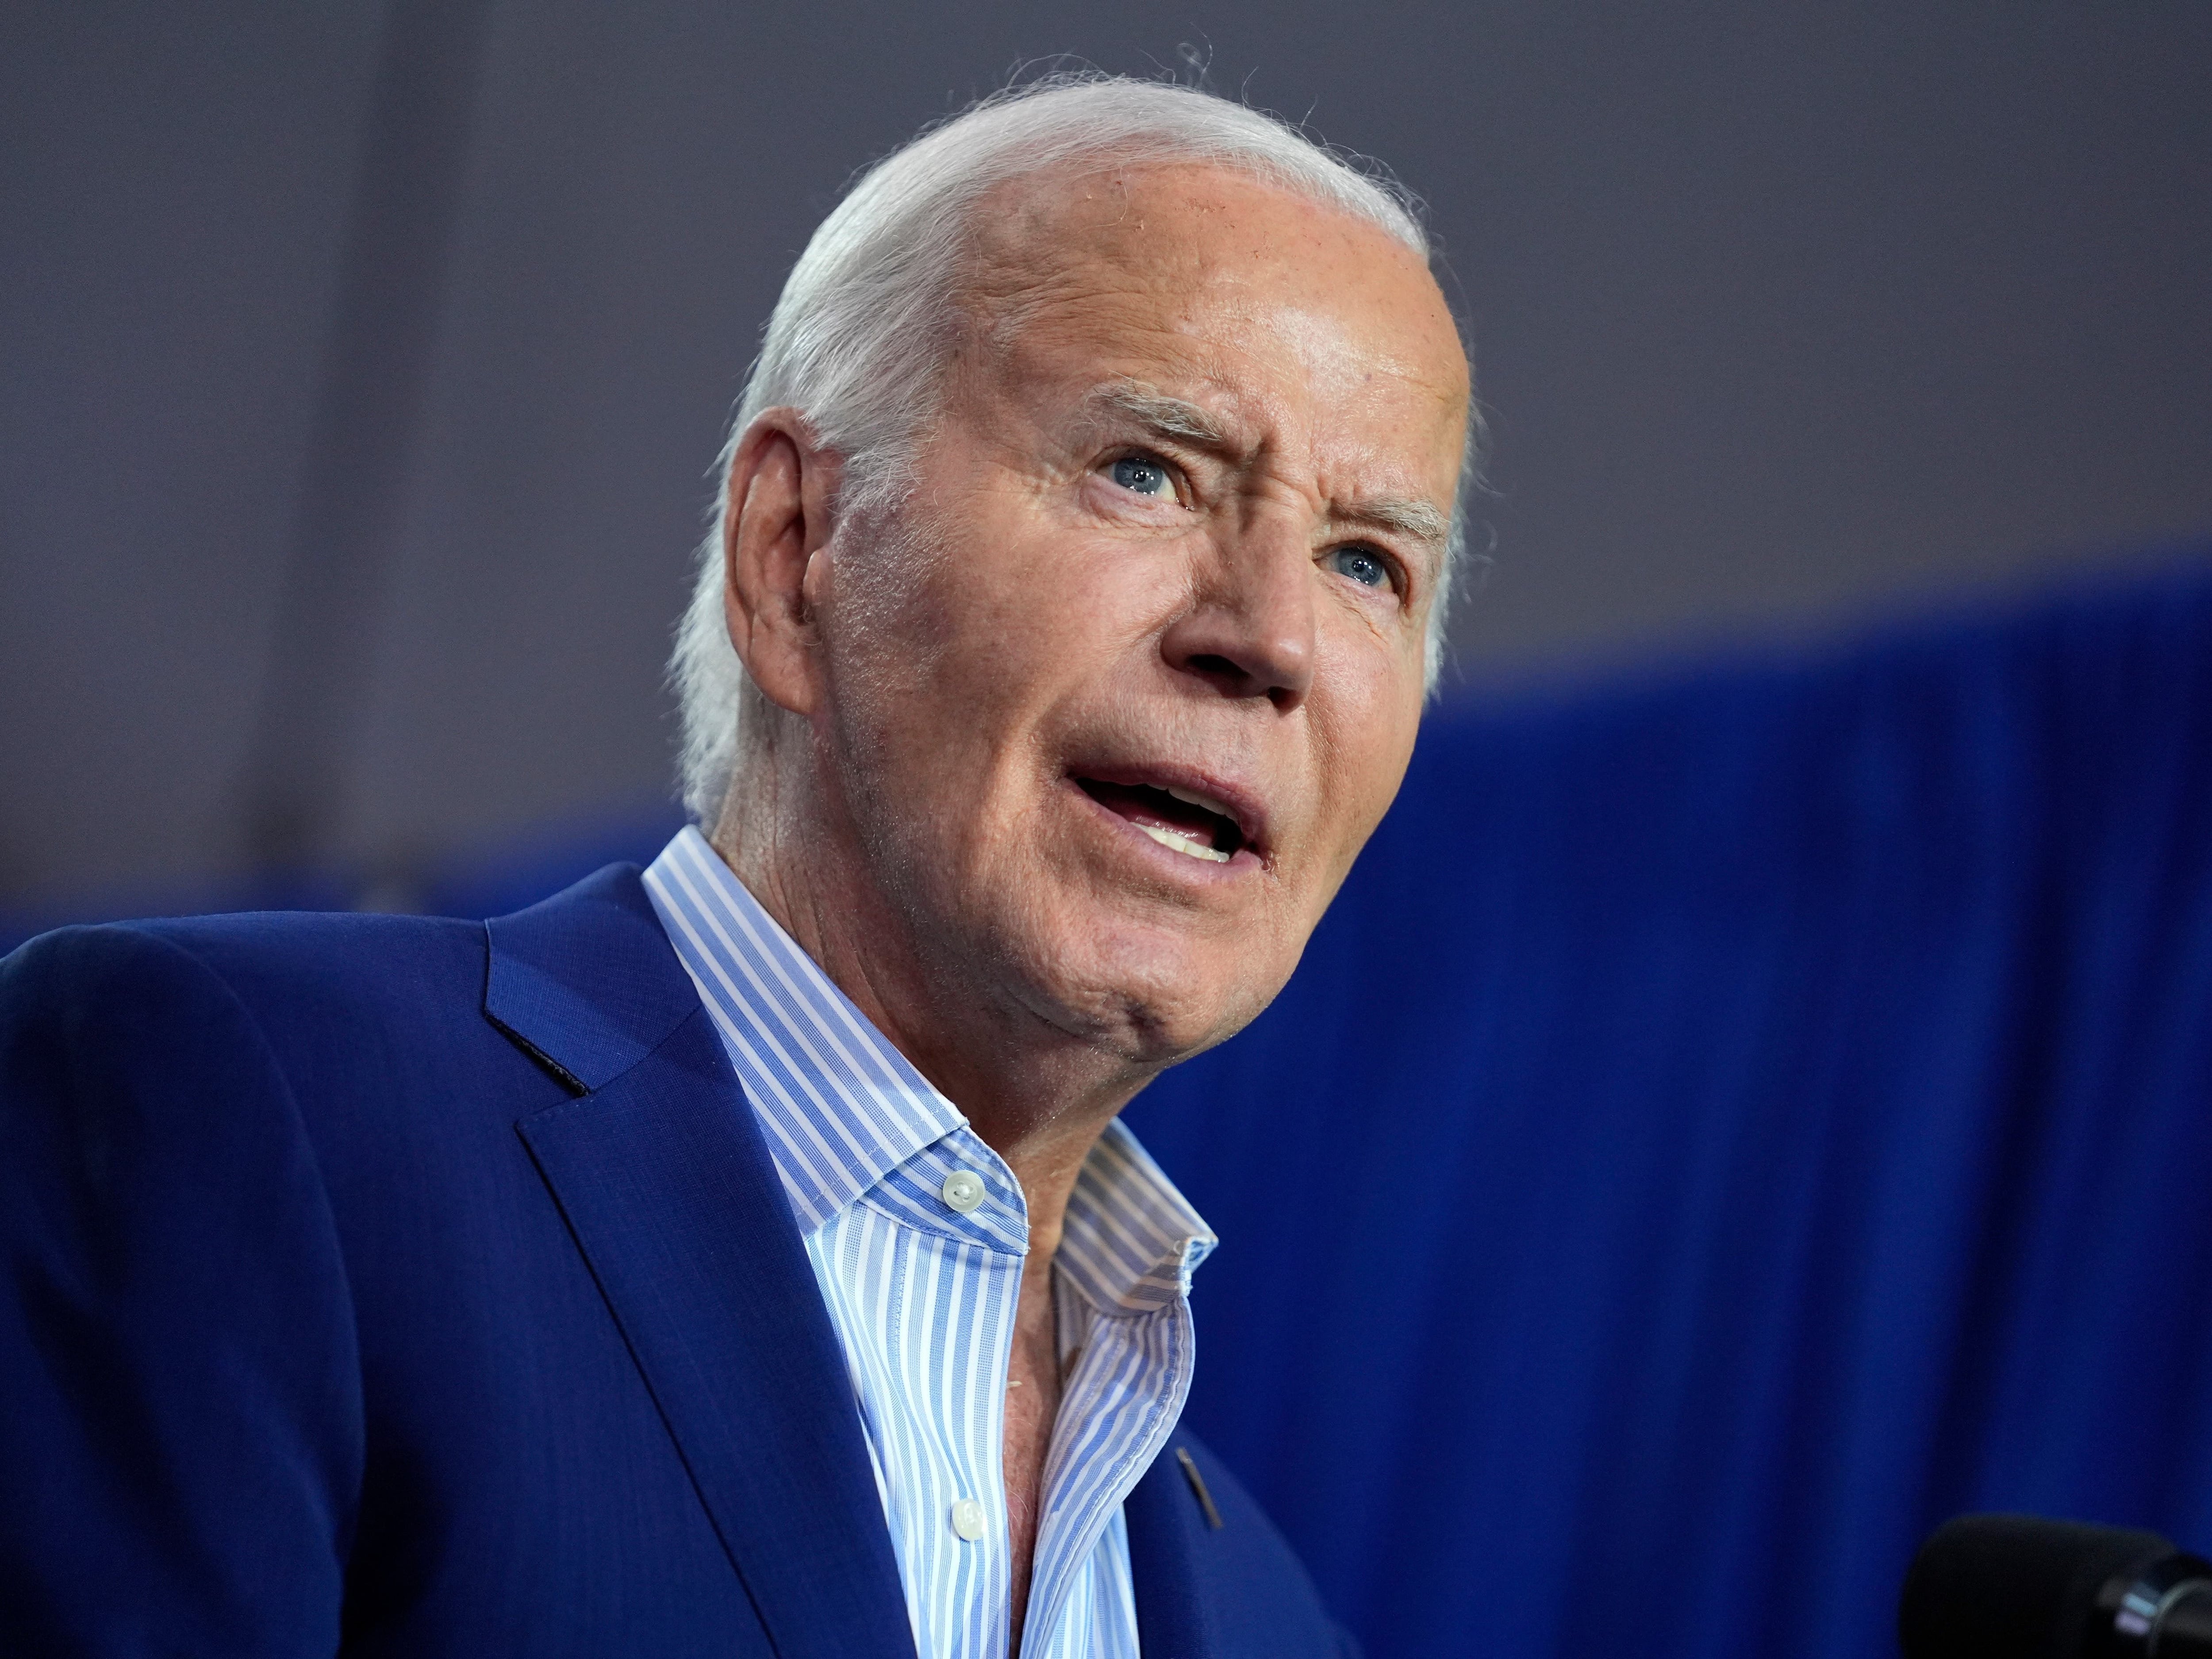 Biden appeals to donors as concerns persist over debate performance